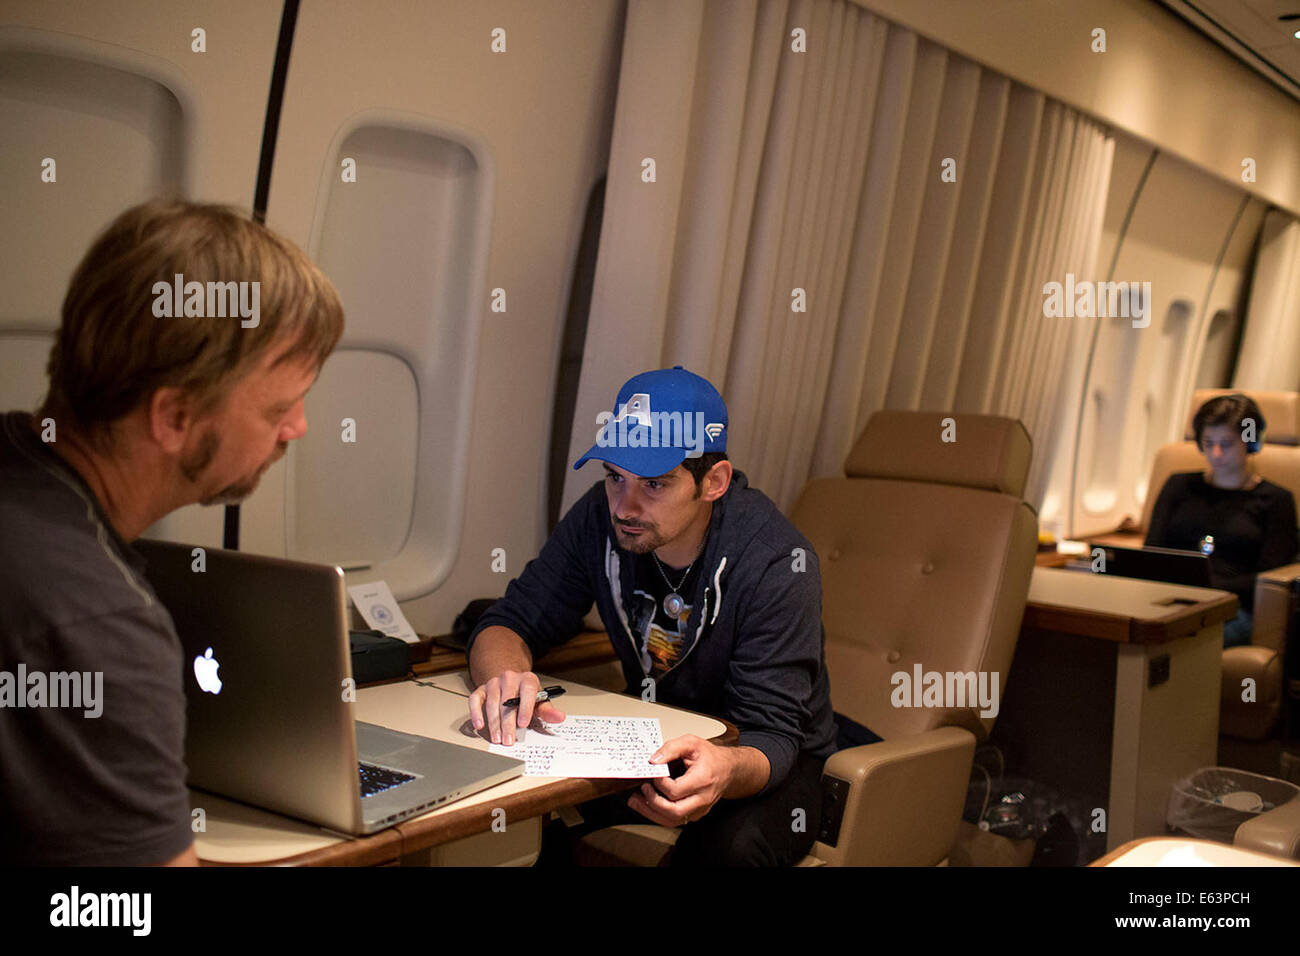 Country singer Brad Paisley works on his setlist with Kendal Marcy, left, aboard Air Force One en route to Bagram Airfield, Afghanistan with President Barack Obama to visit U.S. troops, Sunday, May 25, 2014. Stock Photo